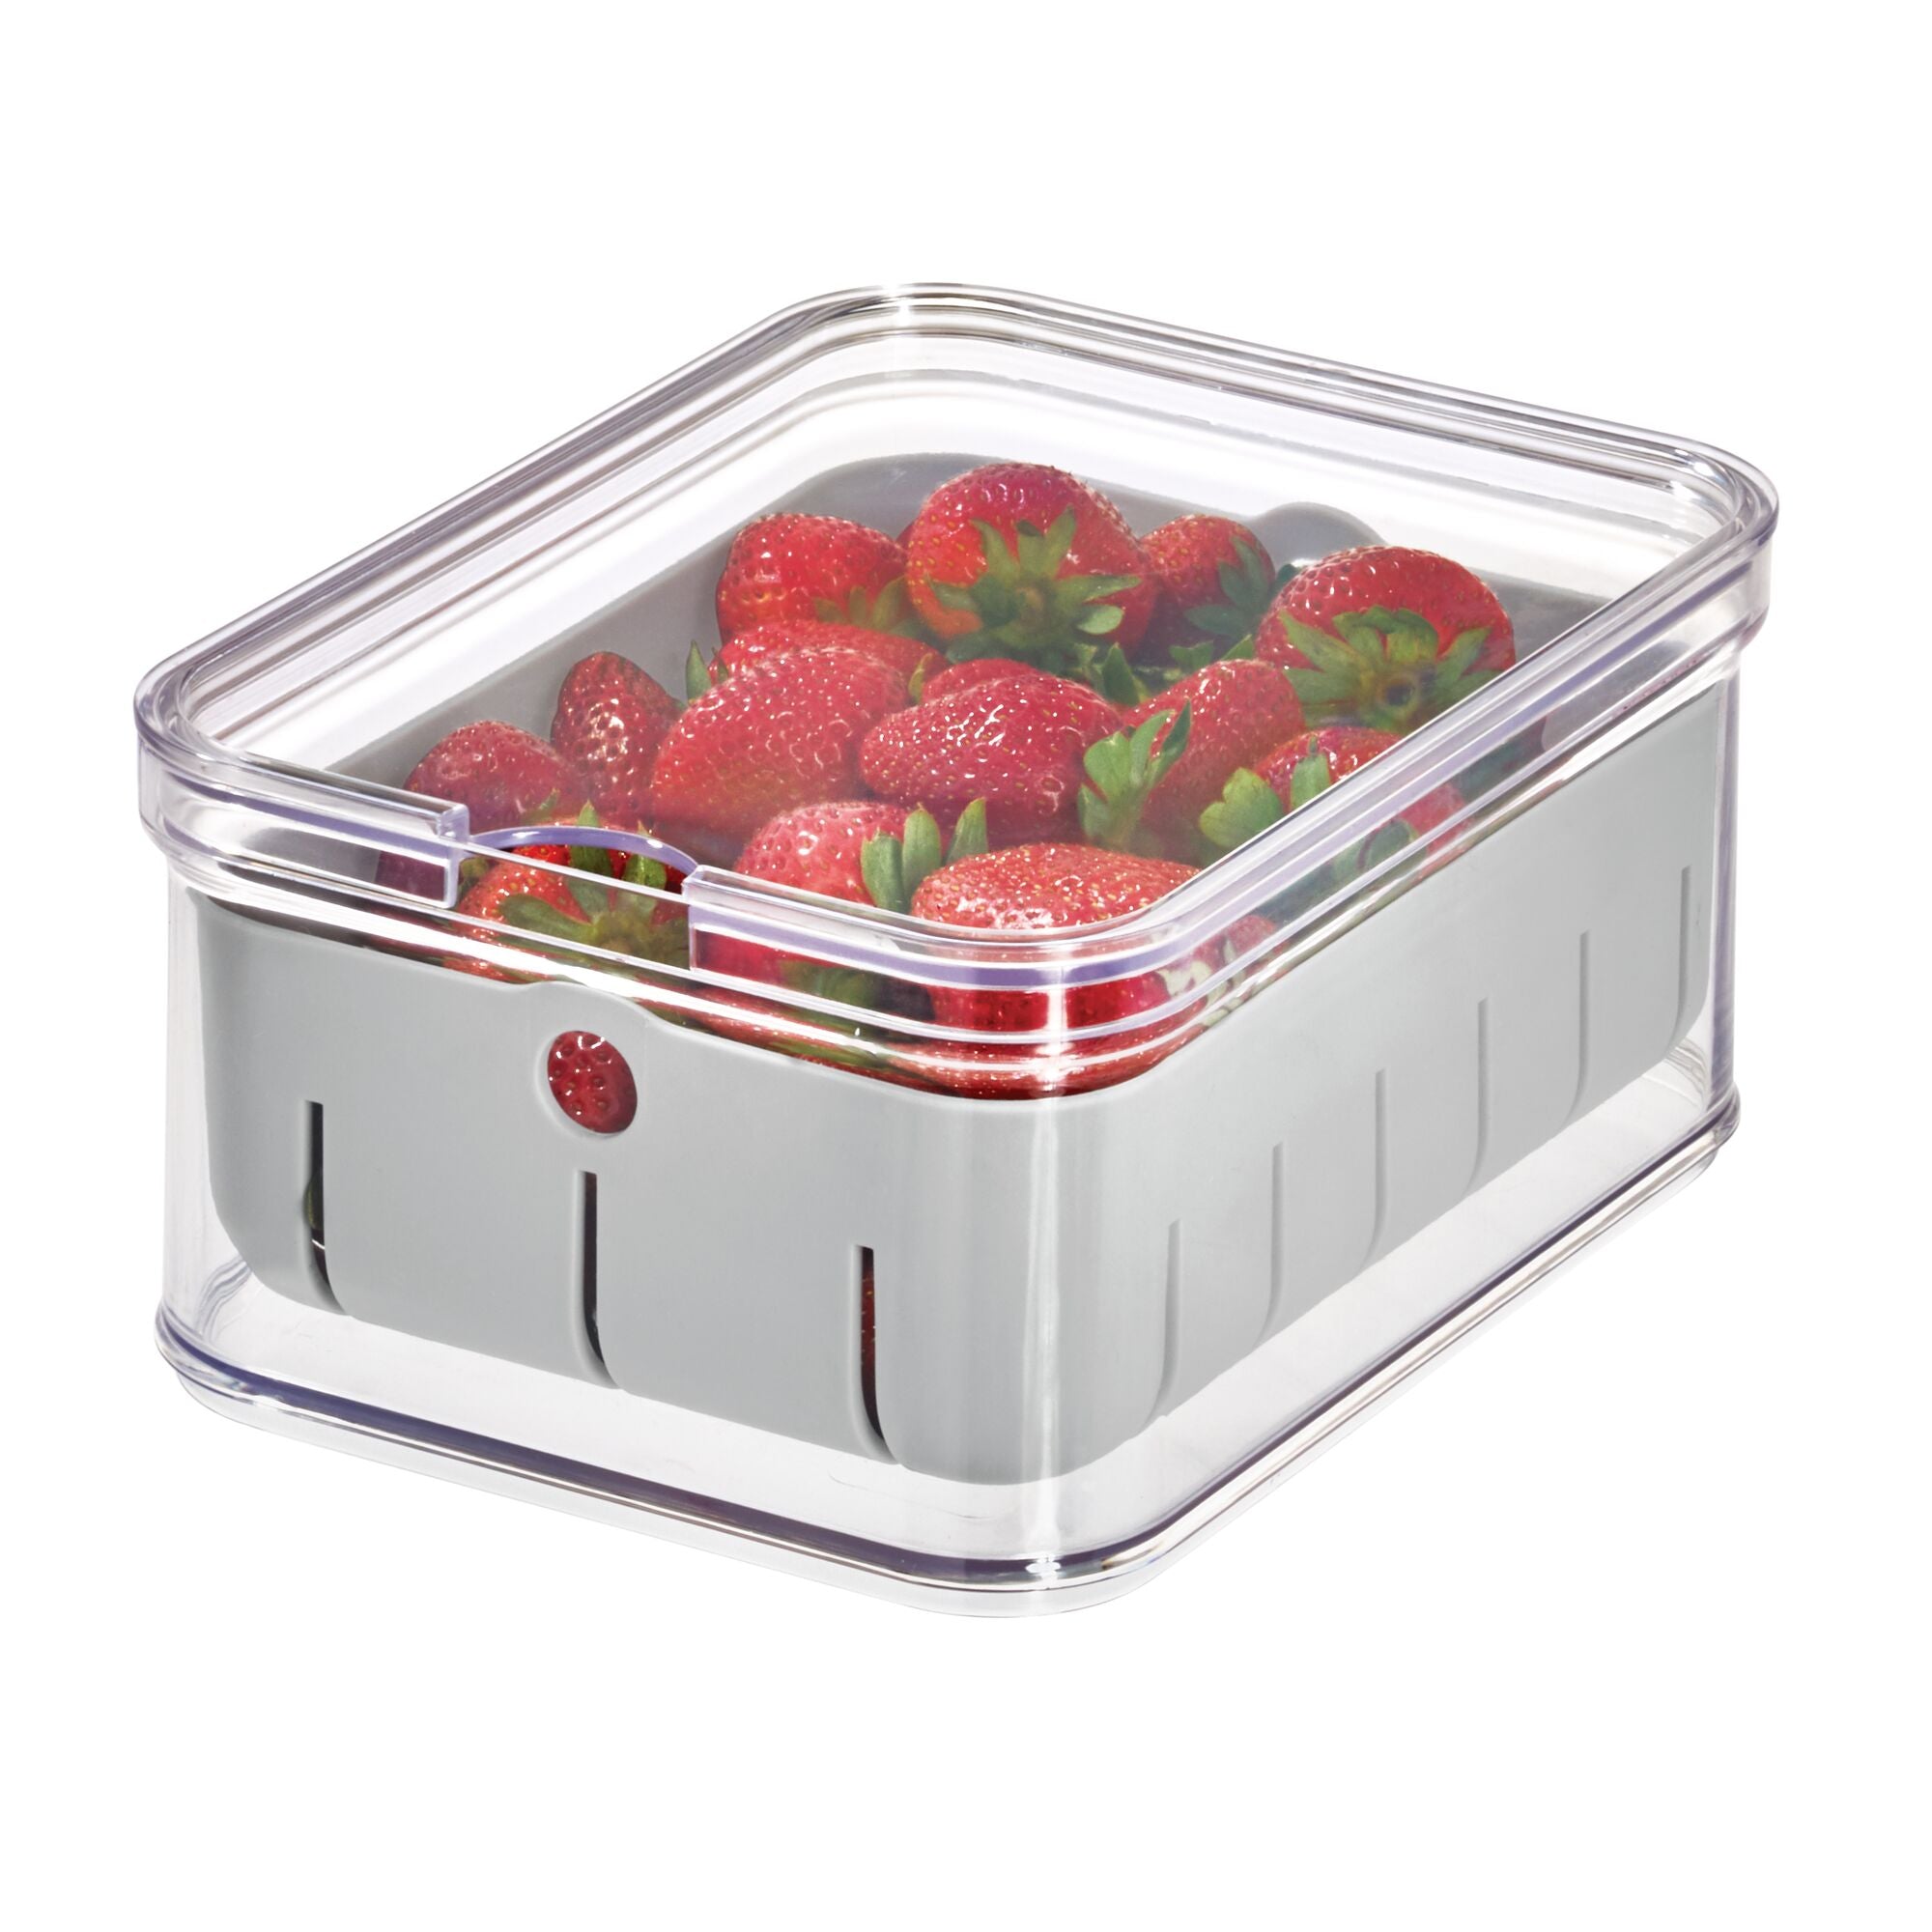 8 Pieces Fruit Storage Containers for Fridge, Large Produce Saver